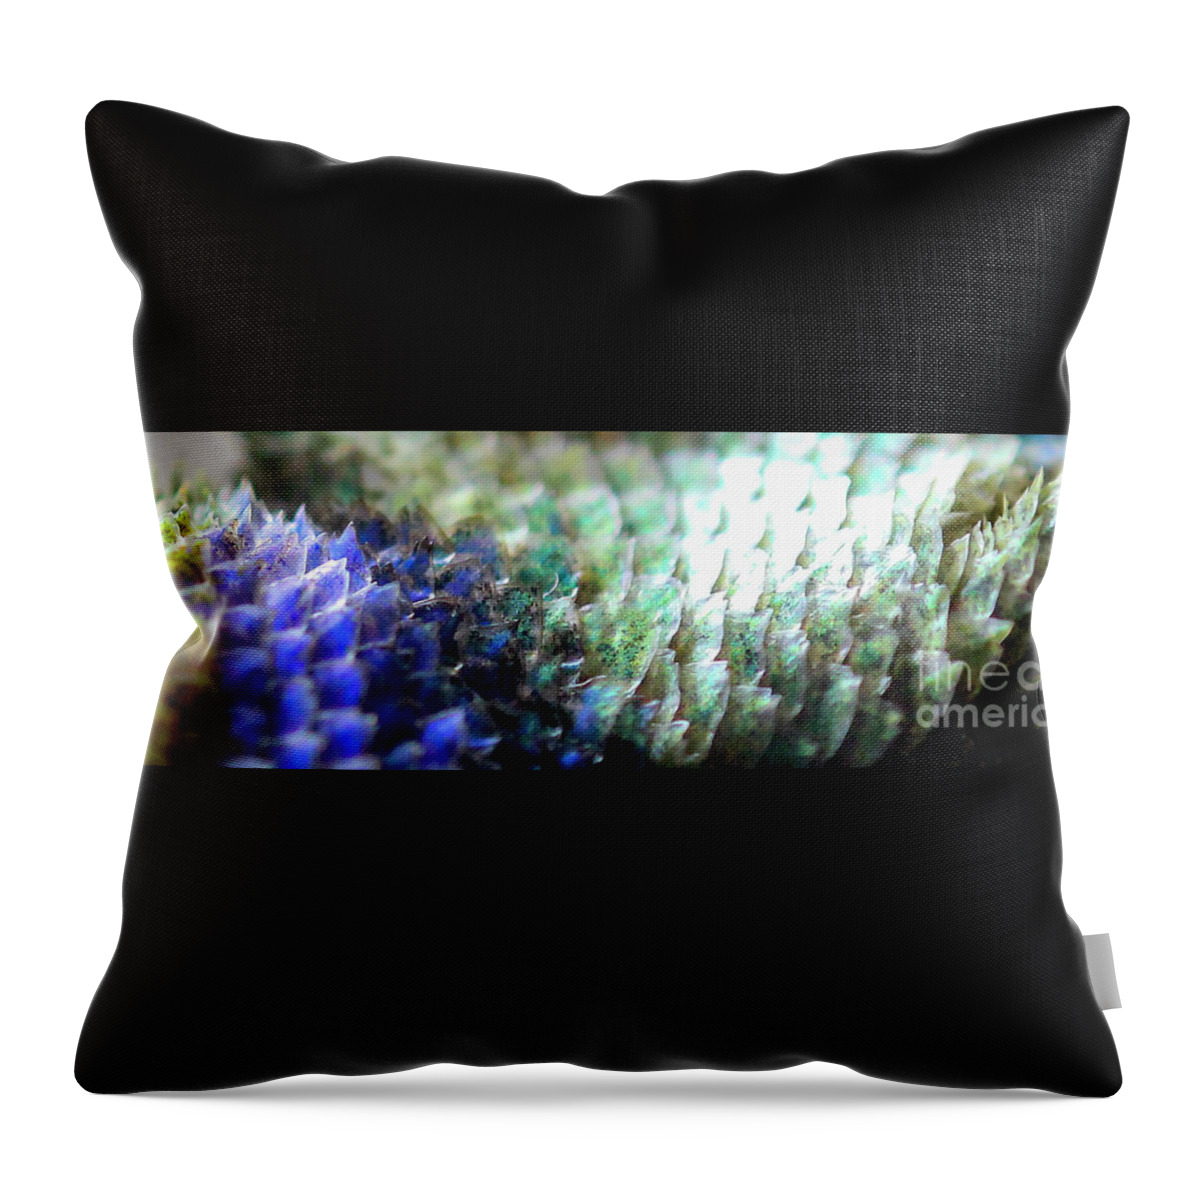 Scales Throw Pillow featuring the photograph Scale Carpet by Shawn Jeffries